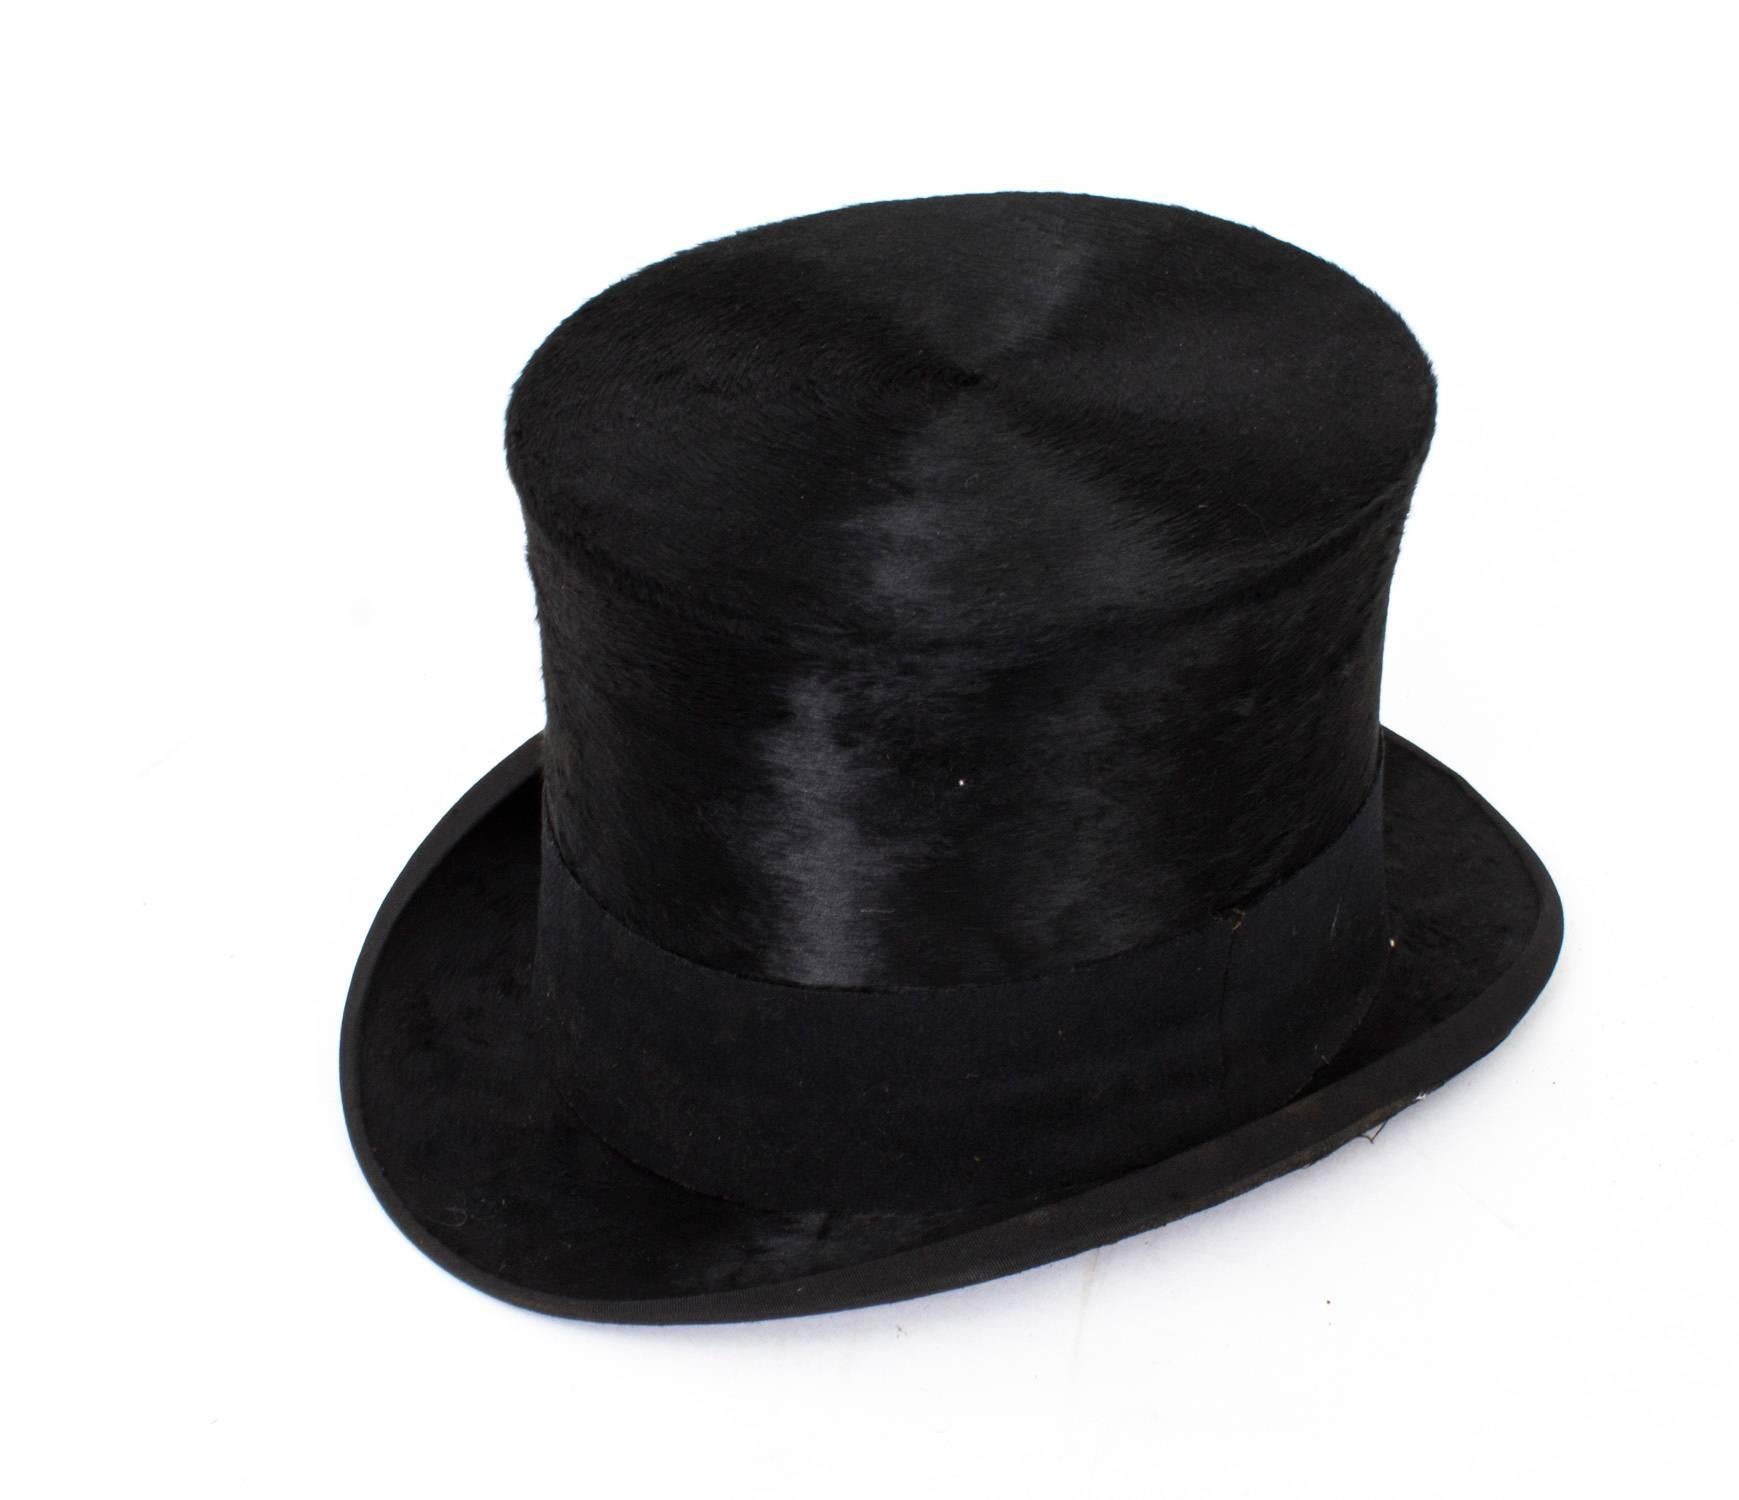 This is a fabulous W. MacQueen & Co silk top hat, contained in its original leather case, circa 1880 in date.

Internal dimensions 19 x 15.5cm in overall good used condition.

W. MacQueen & Co. Ltd. London, Extra Best Quality, Bond St,